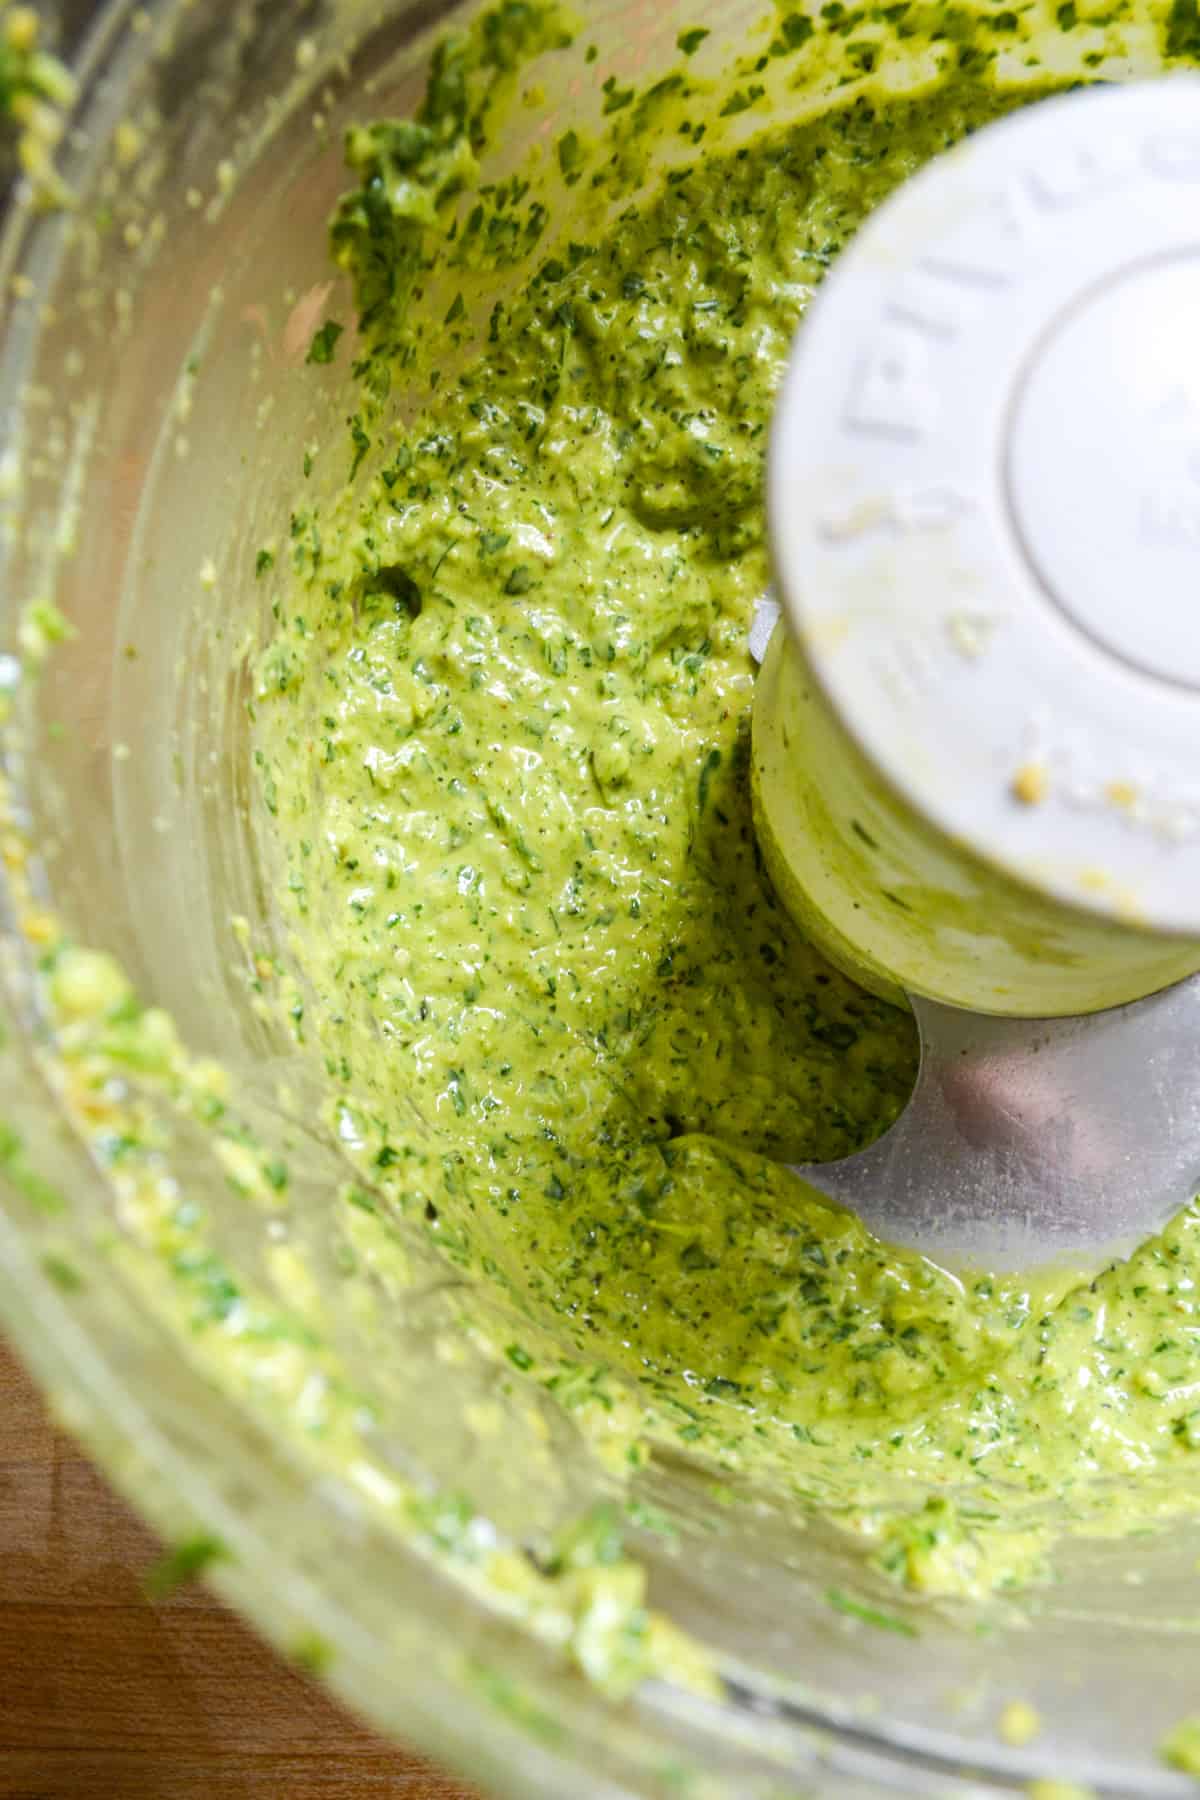 Finished pesto in the food processor.